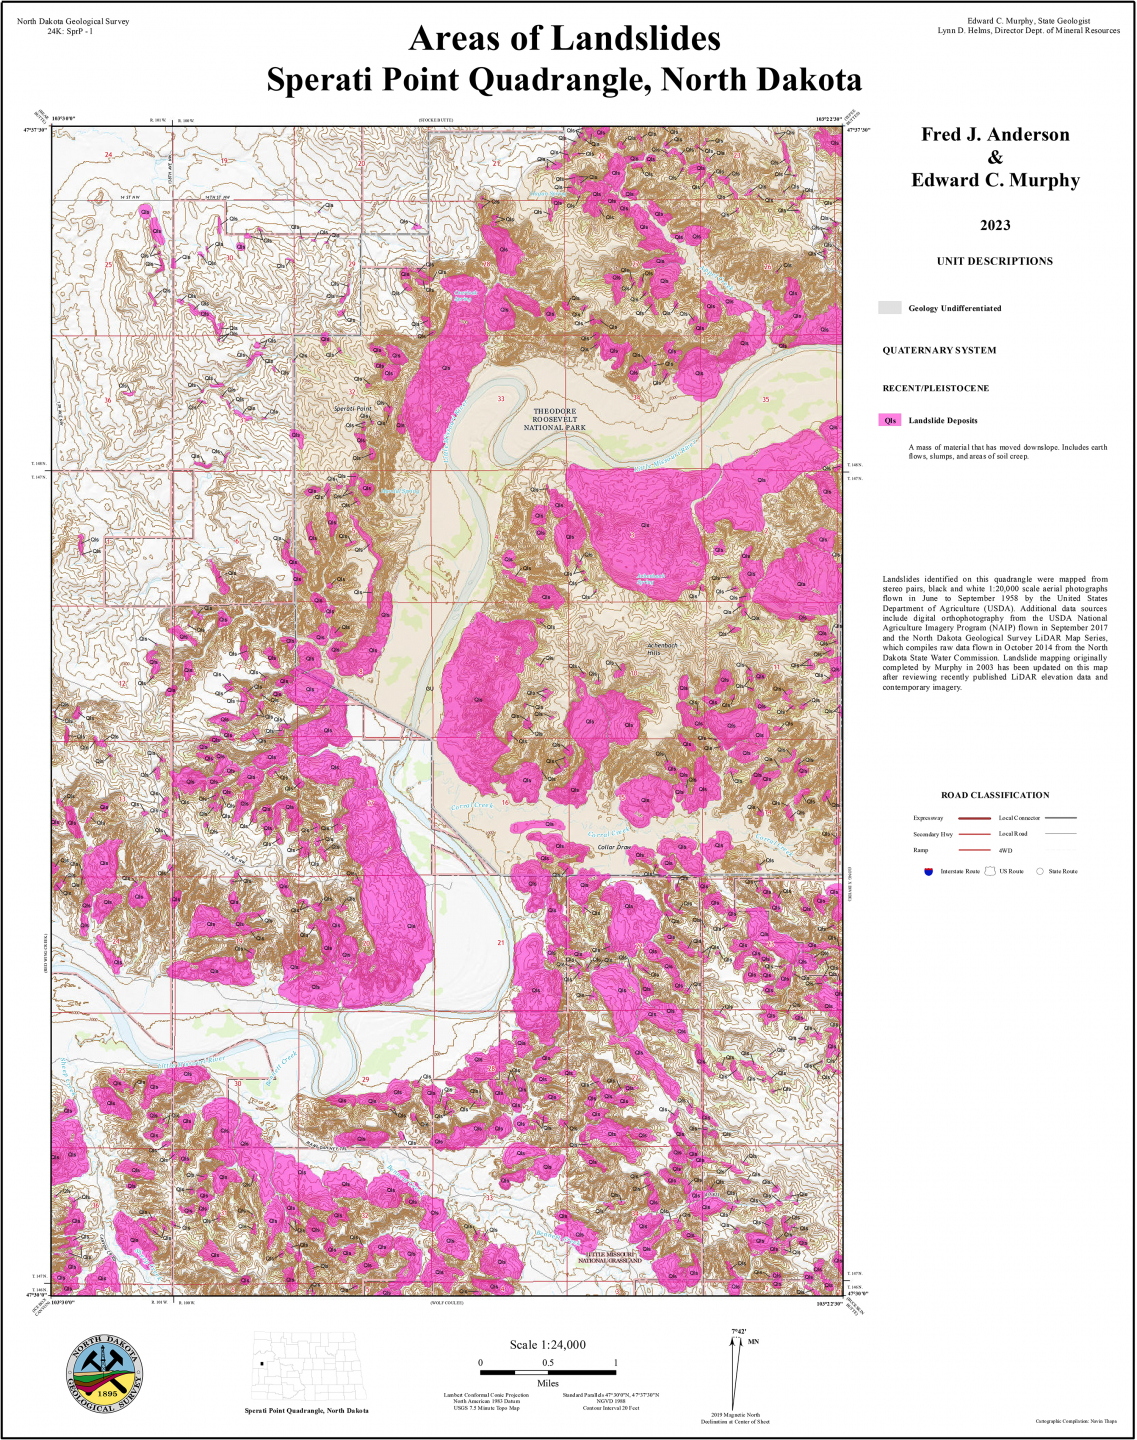 Publication showing a map with landslide locations in pink.